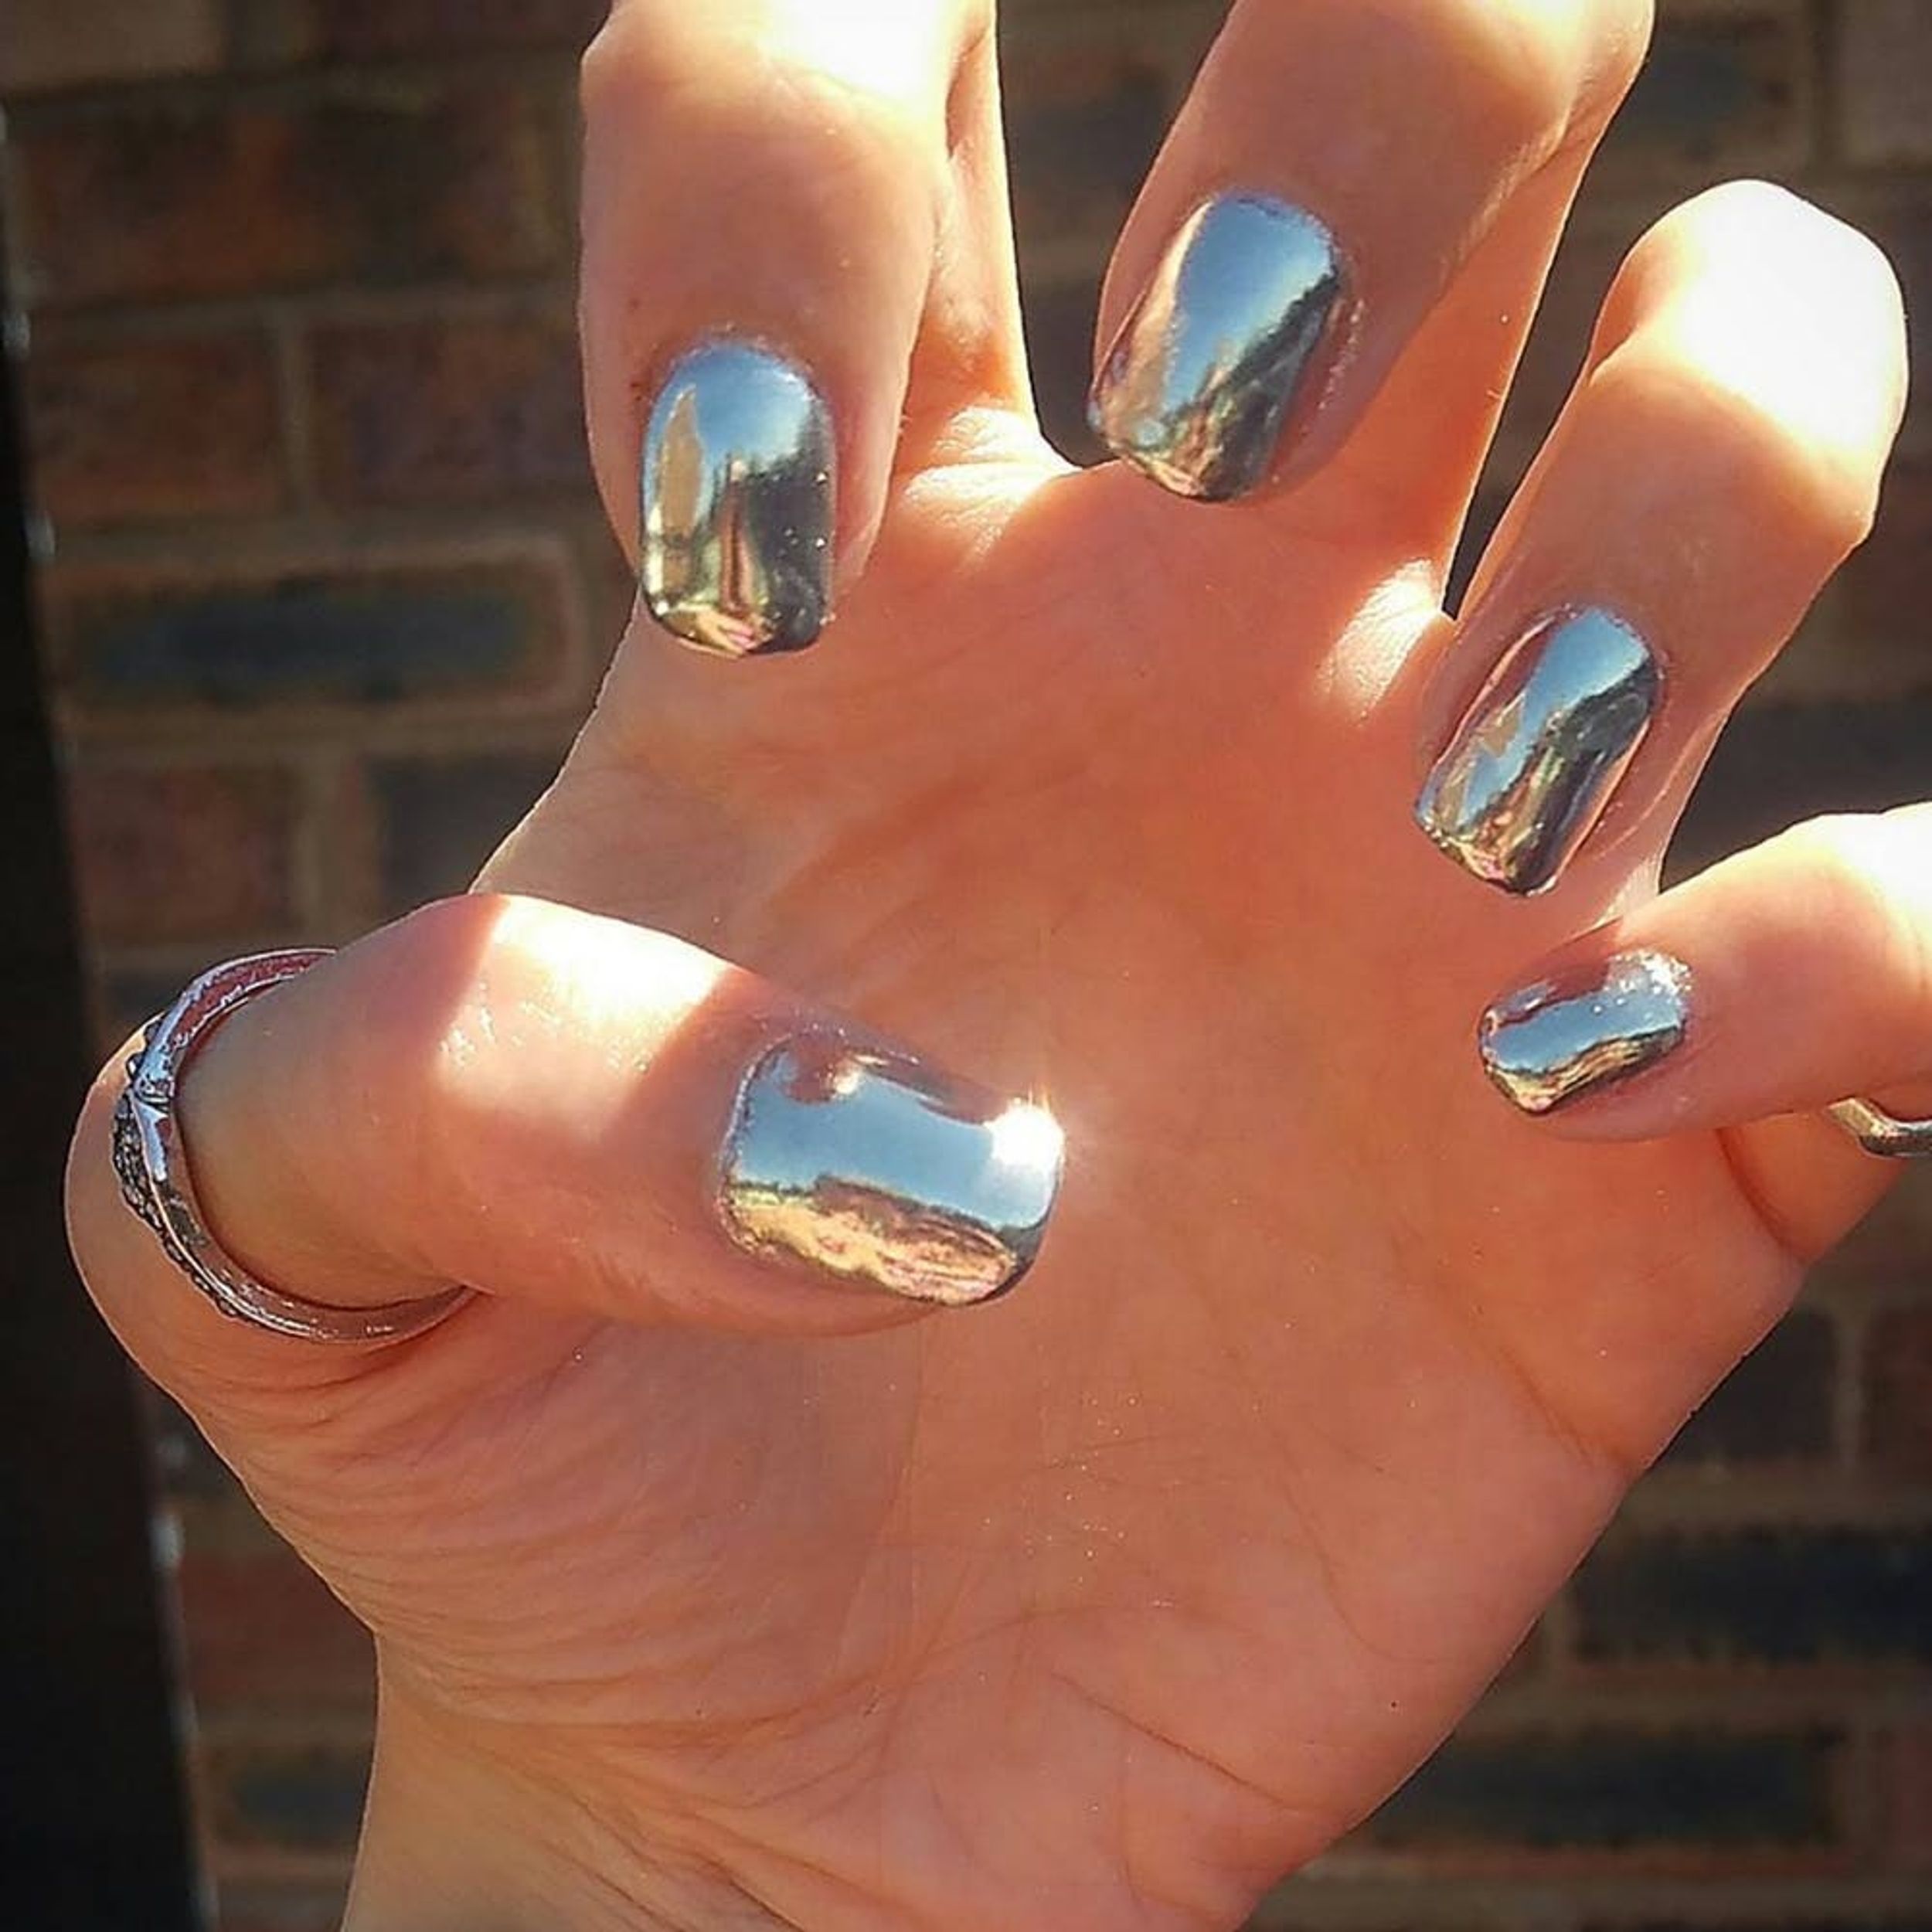 Mirror Nails Are the Shiniest New Manicure Trend You Need to Try